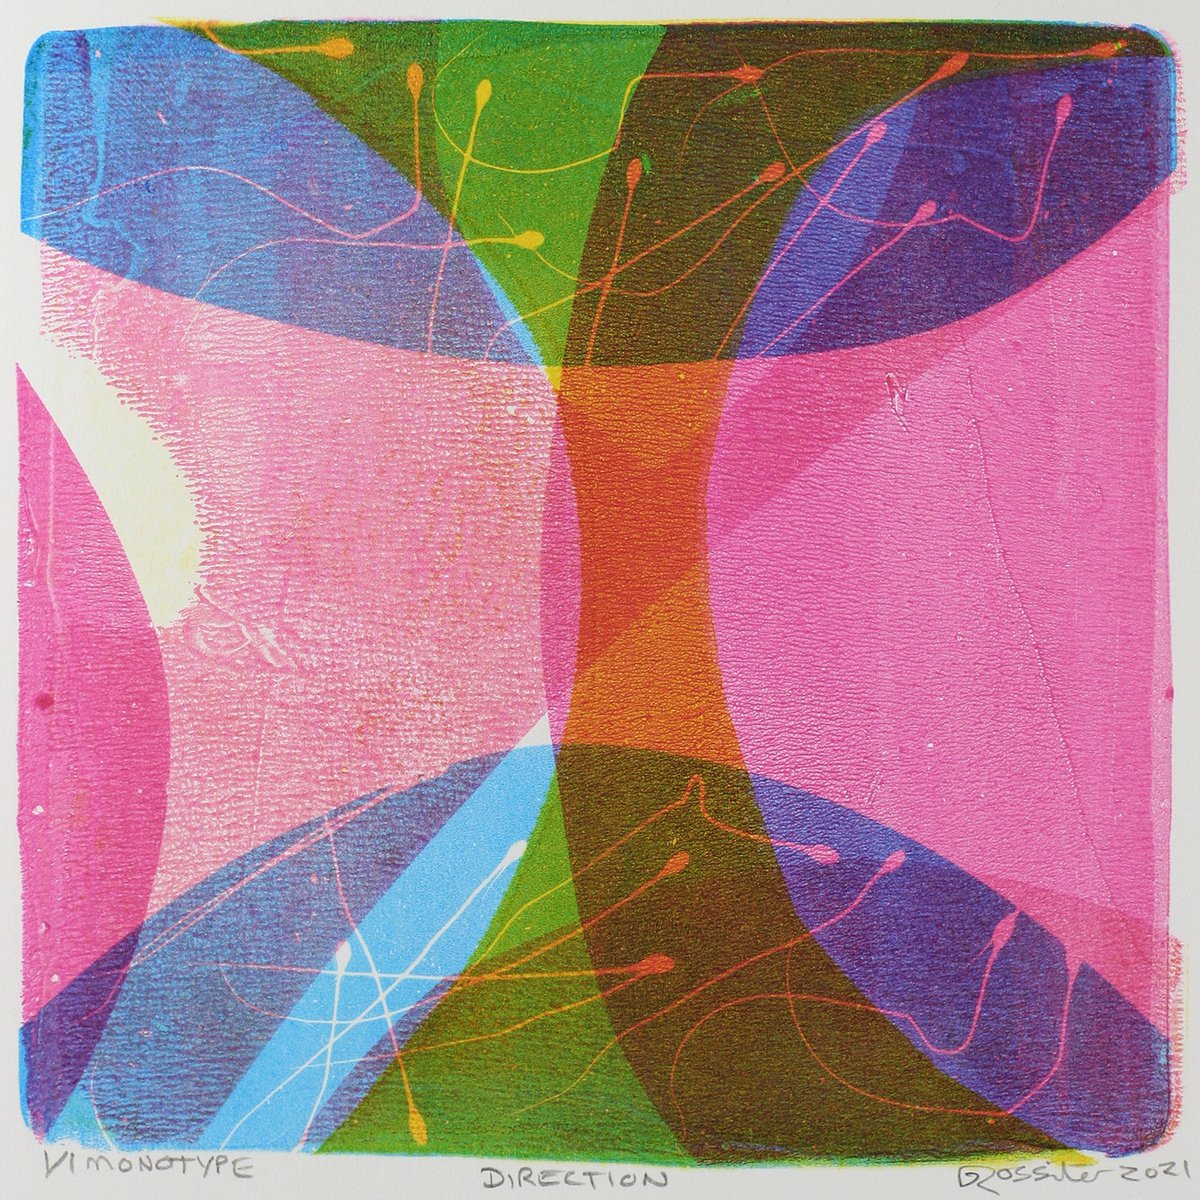 Direction - Unmounted Signed Monotype by Dawn Rossiter